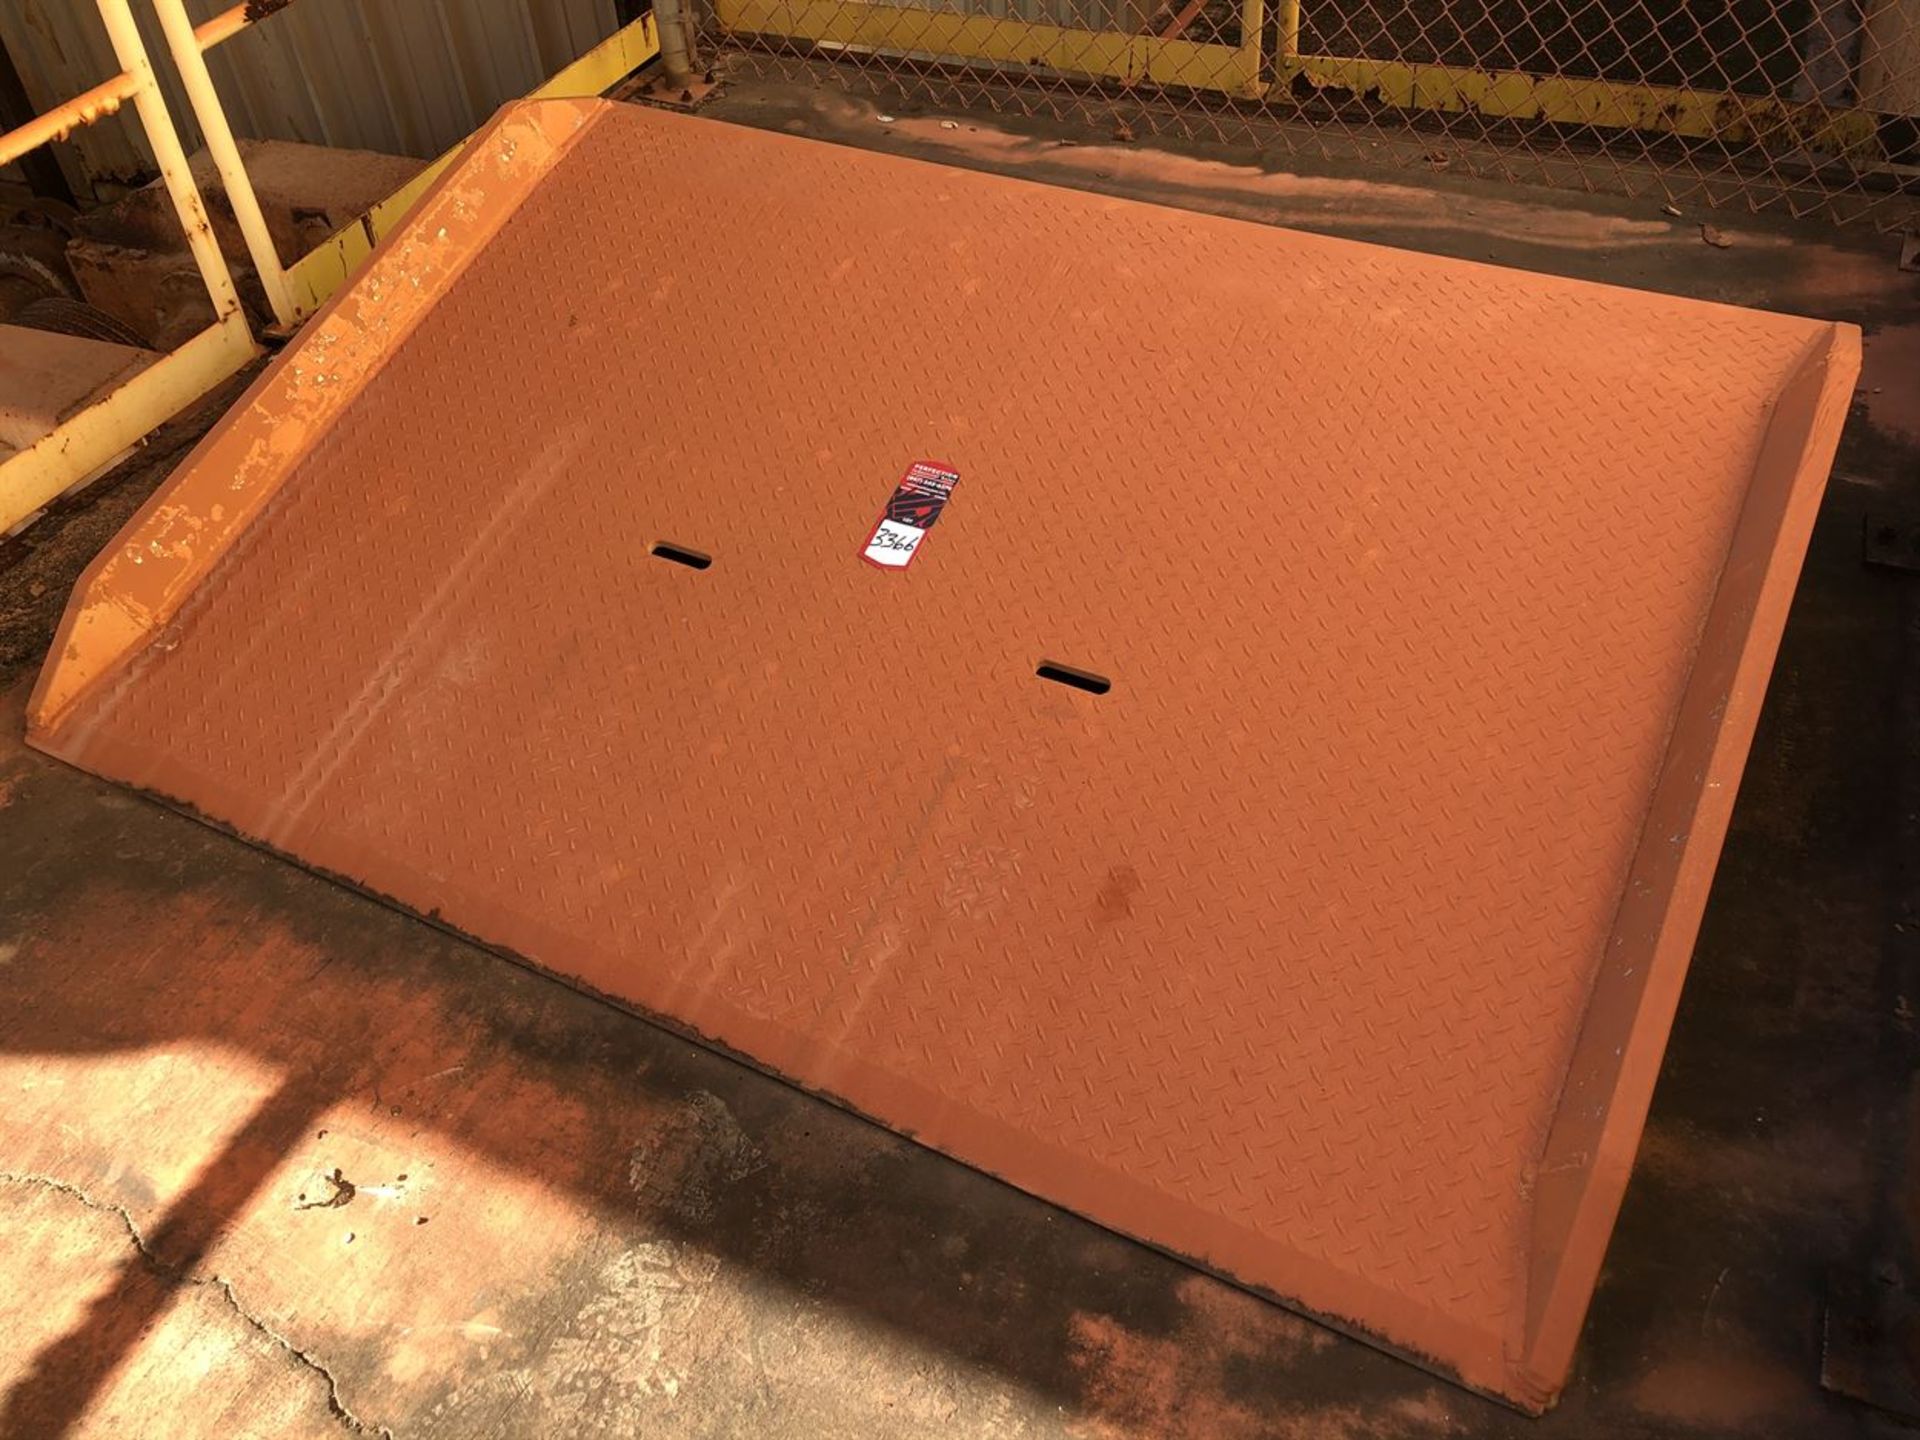 5x7' Aluminum Portable Dock Plate (Location: Chemical Warehouse)